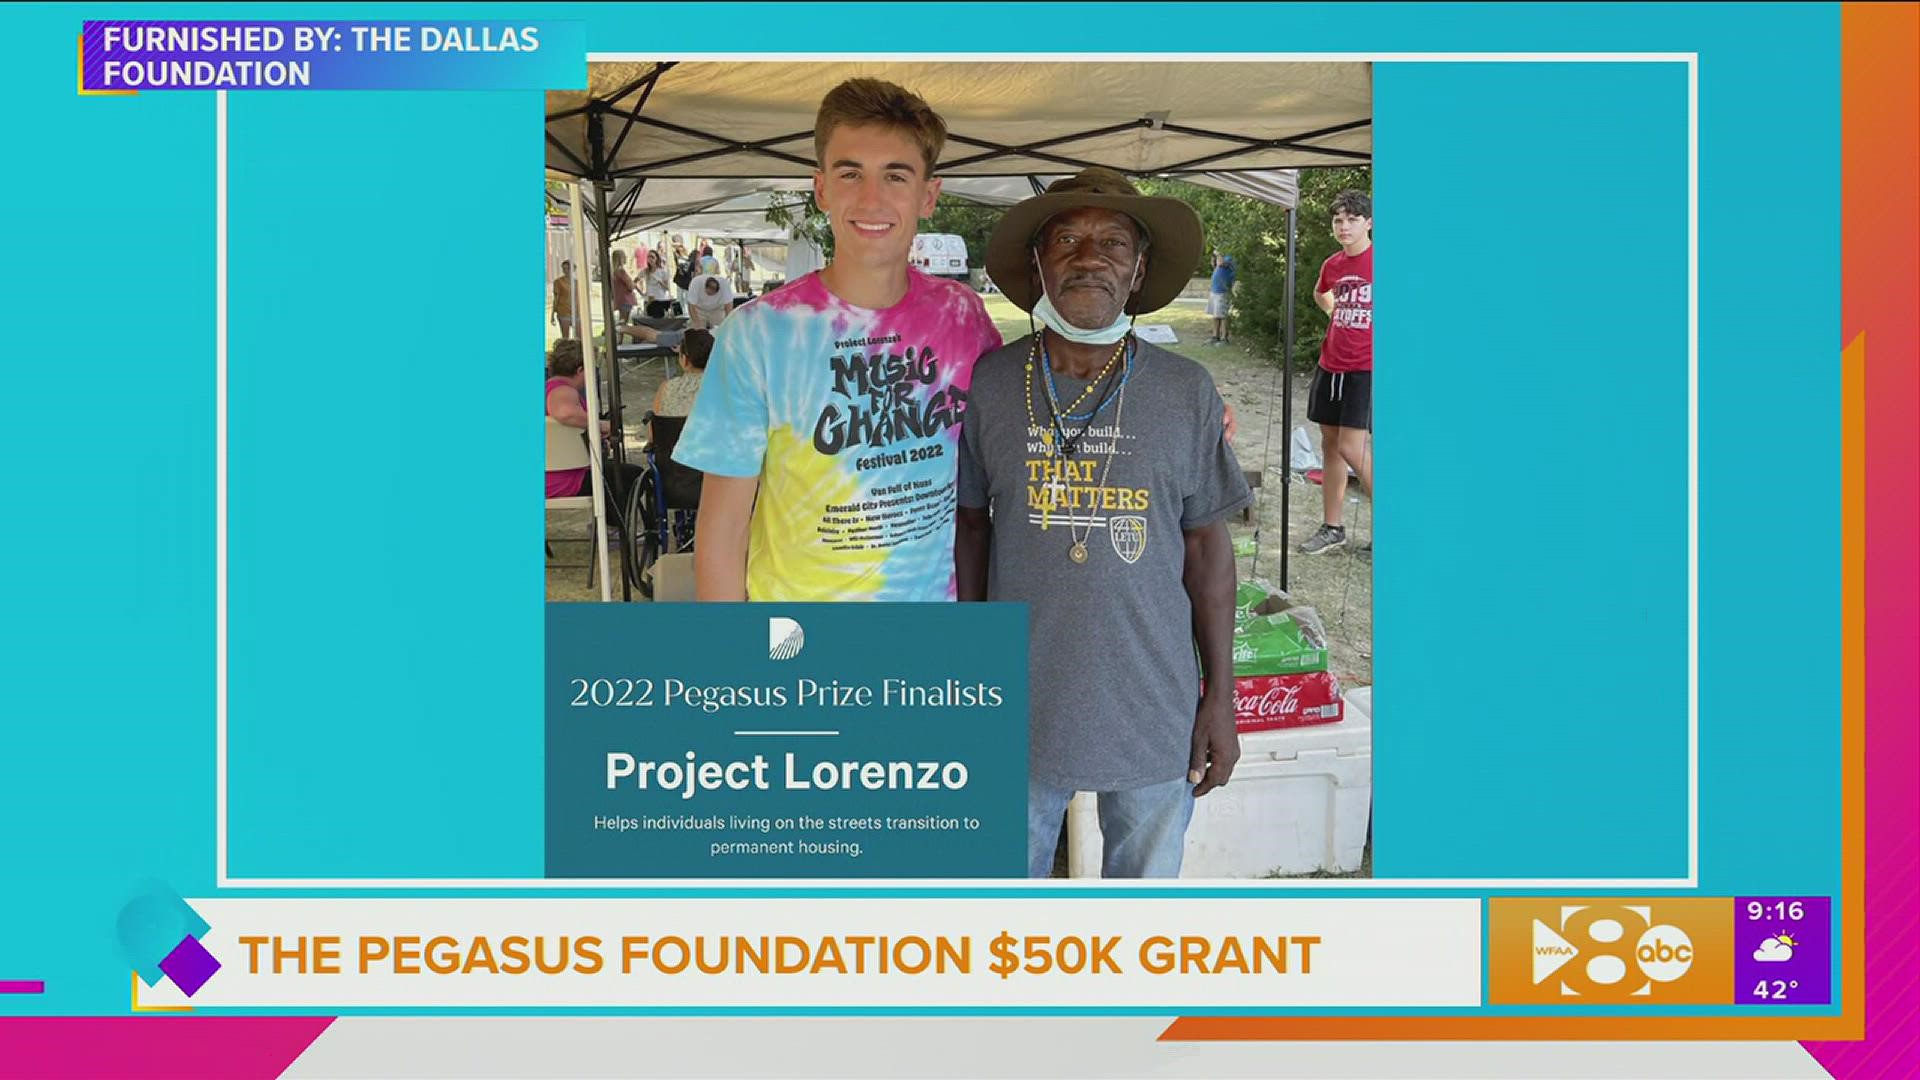 The Dallas foundation, the first community foundation in Texas, awarded the Pegasus prize to Seeds 2 STEM.